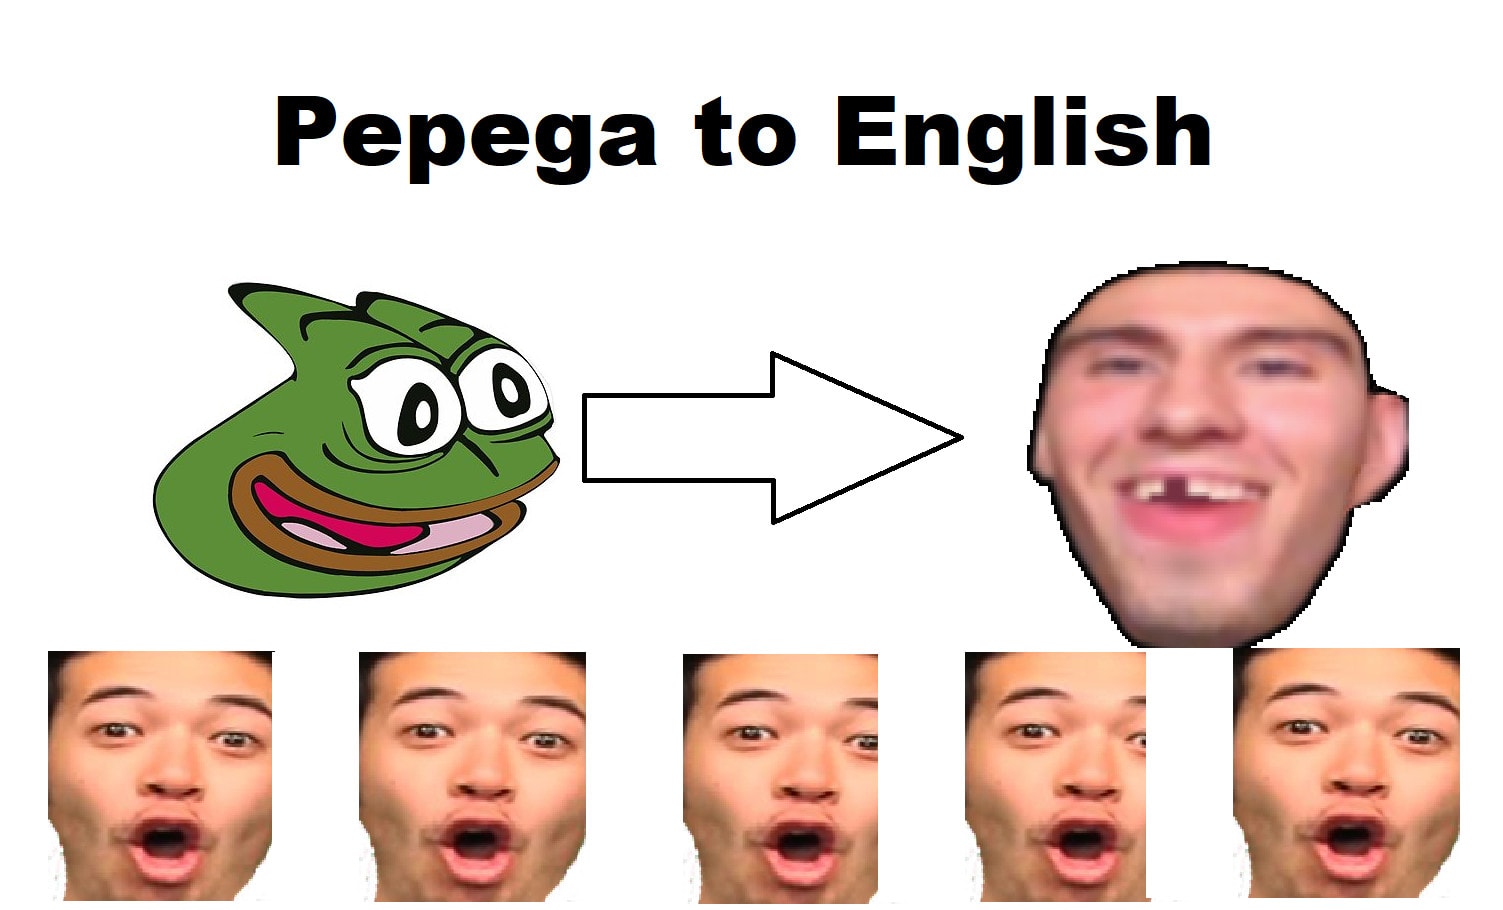 Translate any xqc twitch clip from pepega to english by Pie101